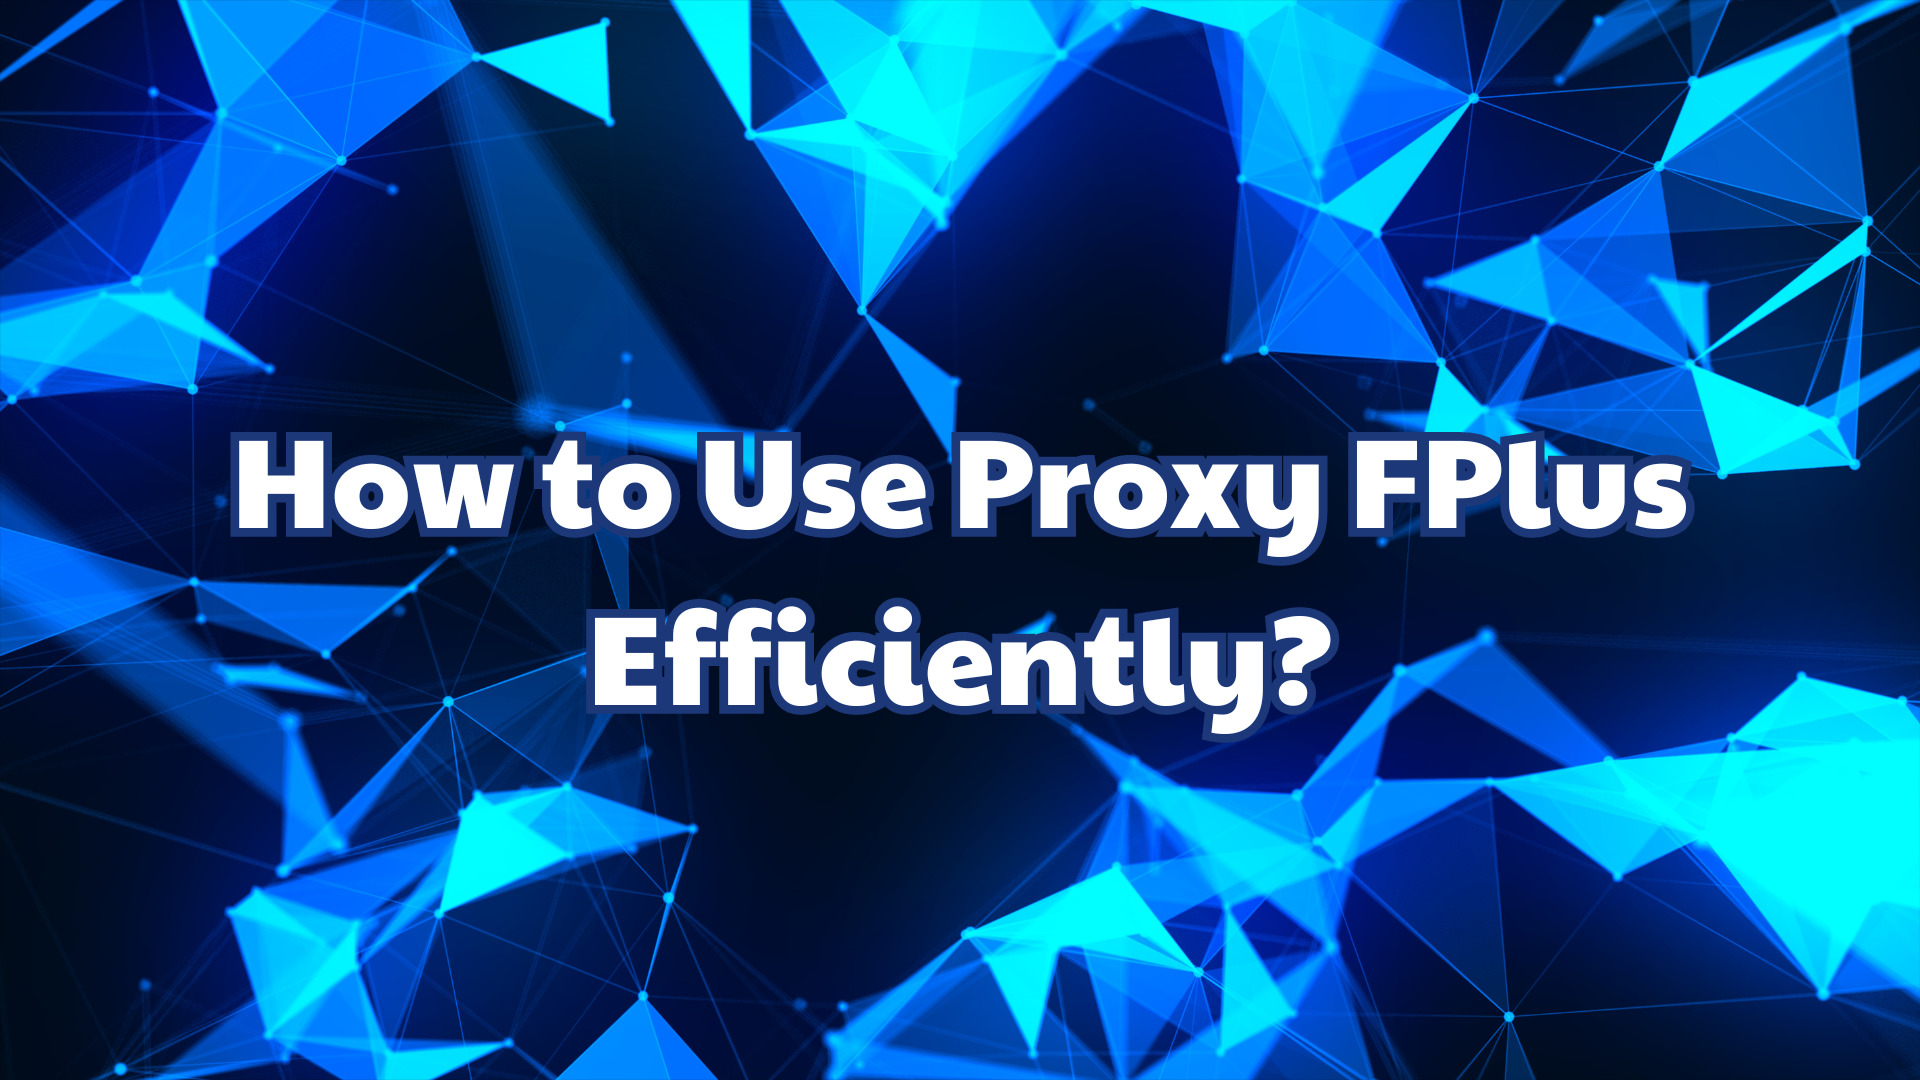 How to Use Proxy FPlus Efficiently?